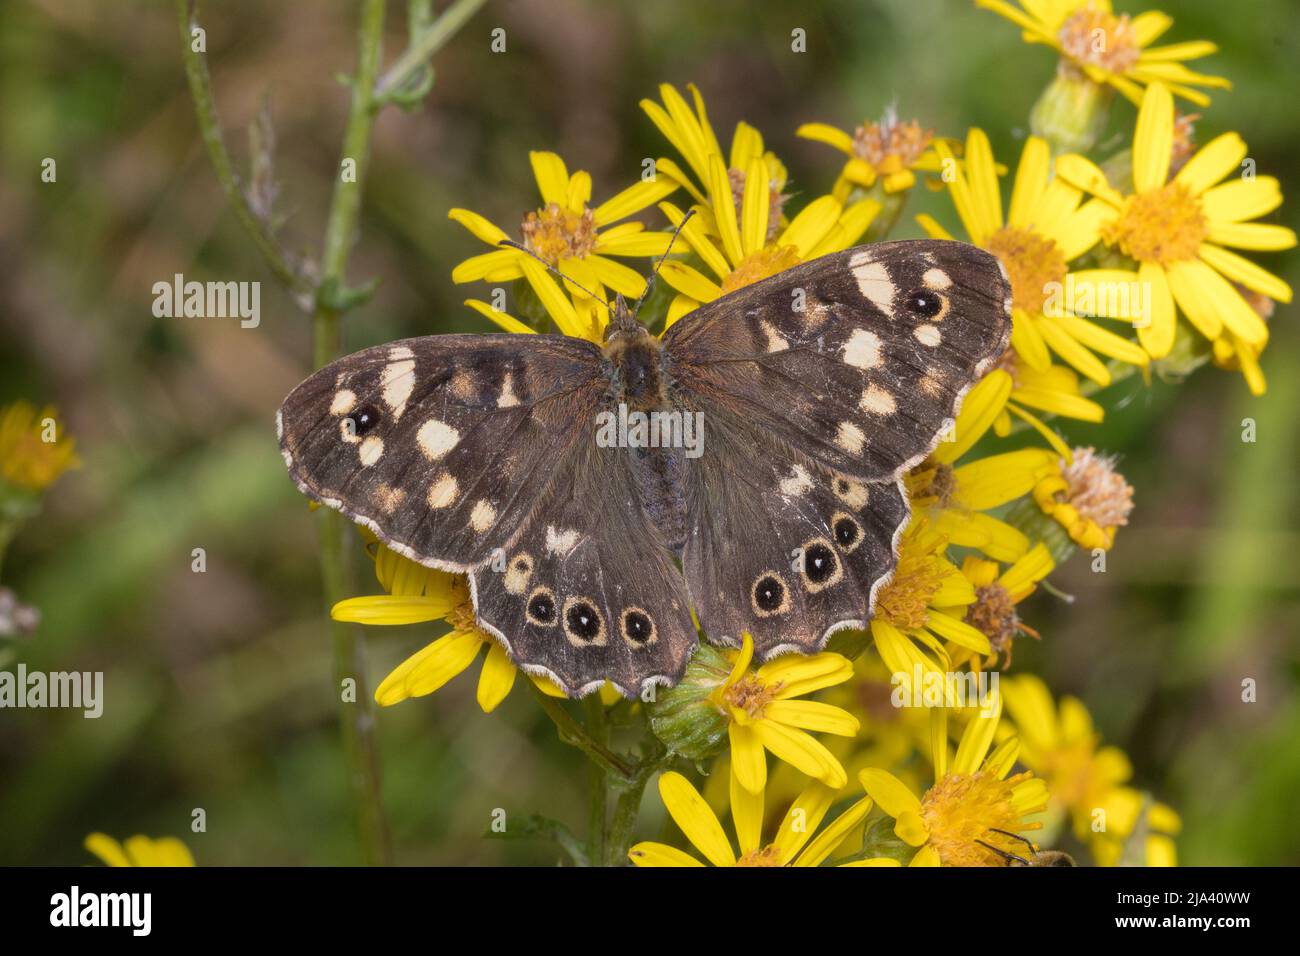 Closeup of a speckled wood butterfly (Pararge aegeria) at rest on flowers. Taken at Joe's Pond nature reserve, Rainton, Tyne & Wear, UK. Stock Photo